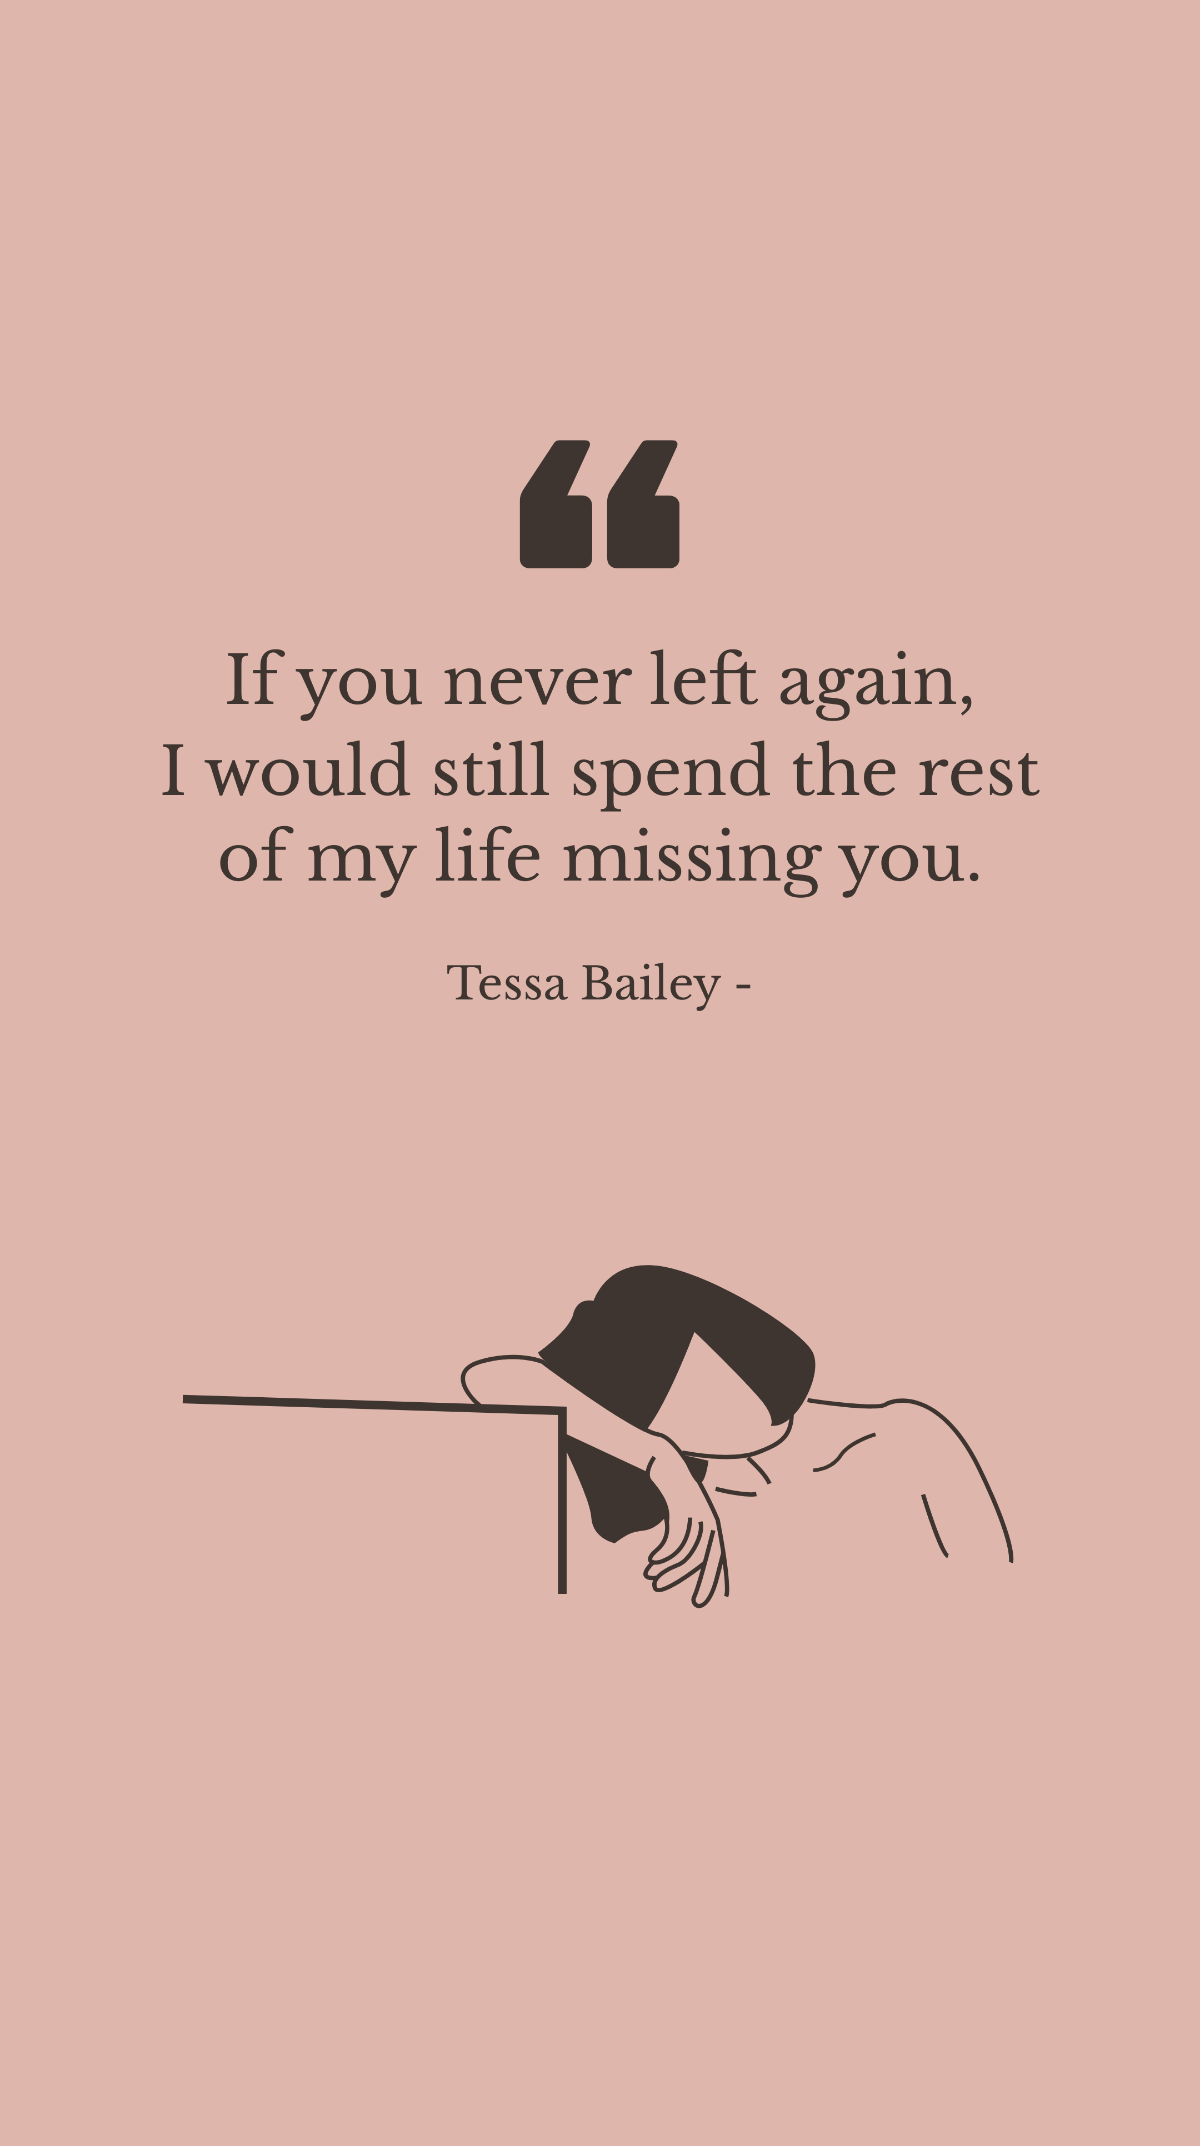 Free Tessa Bailey - If you never left again, I would still spend the rest of my life missing you. Template